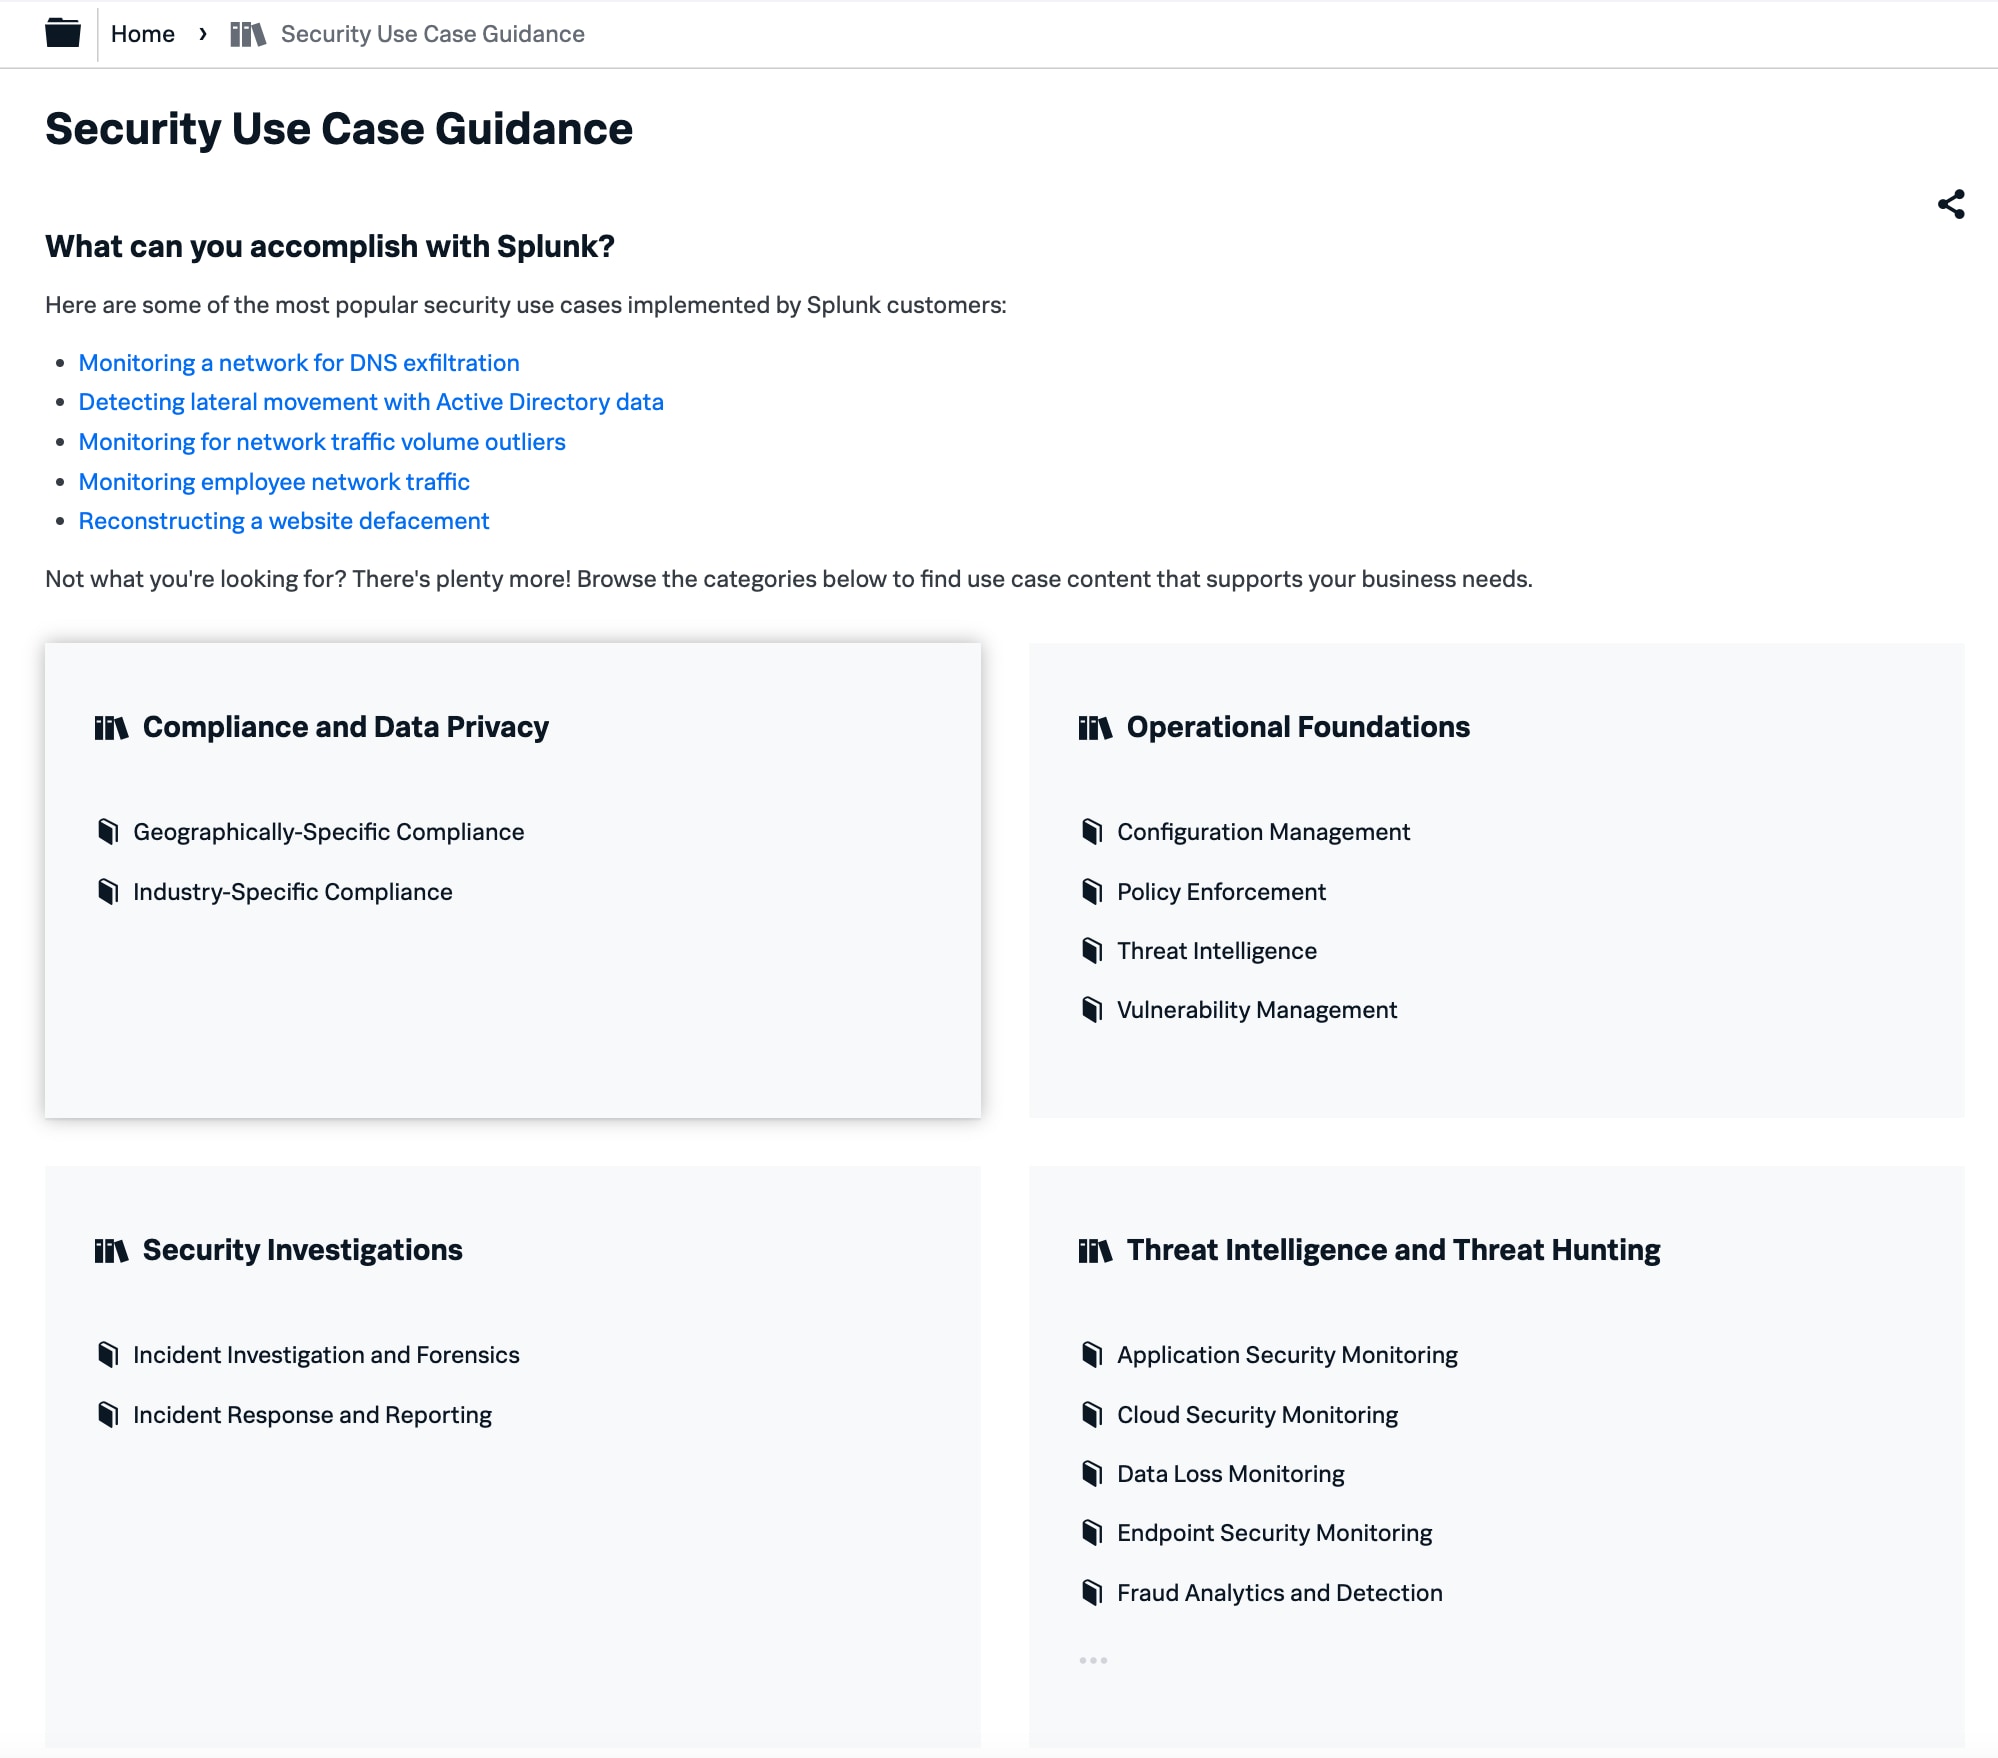 Security Use Case Guidance